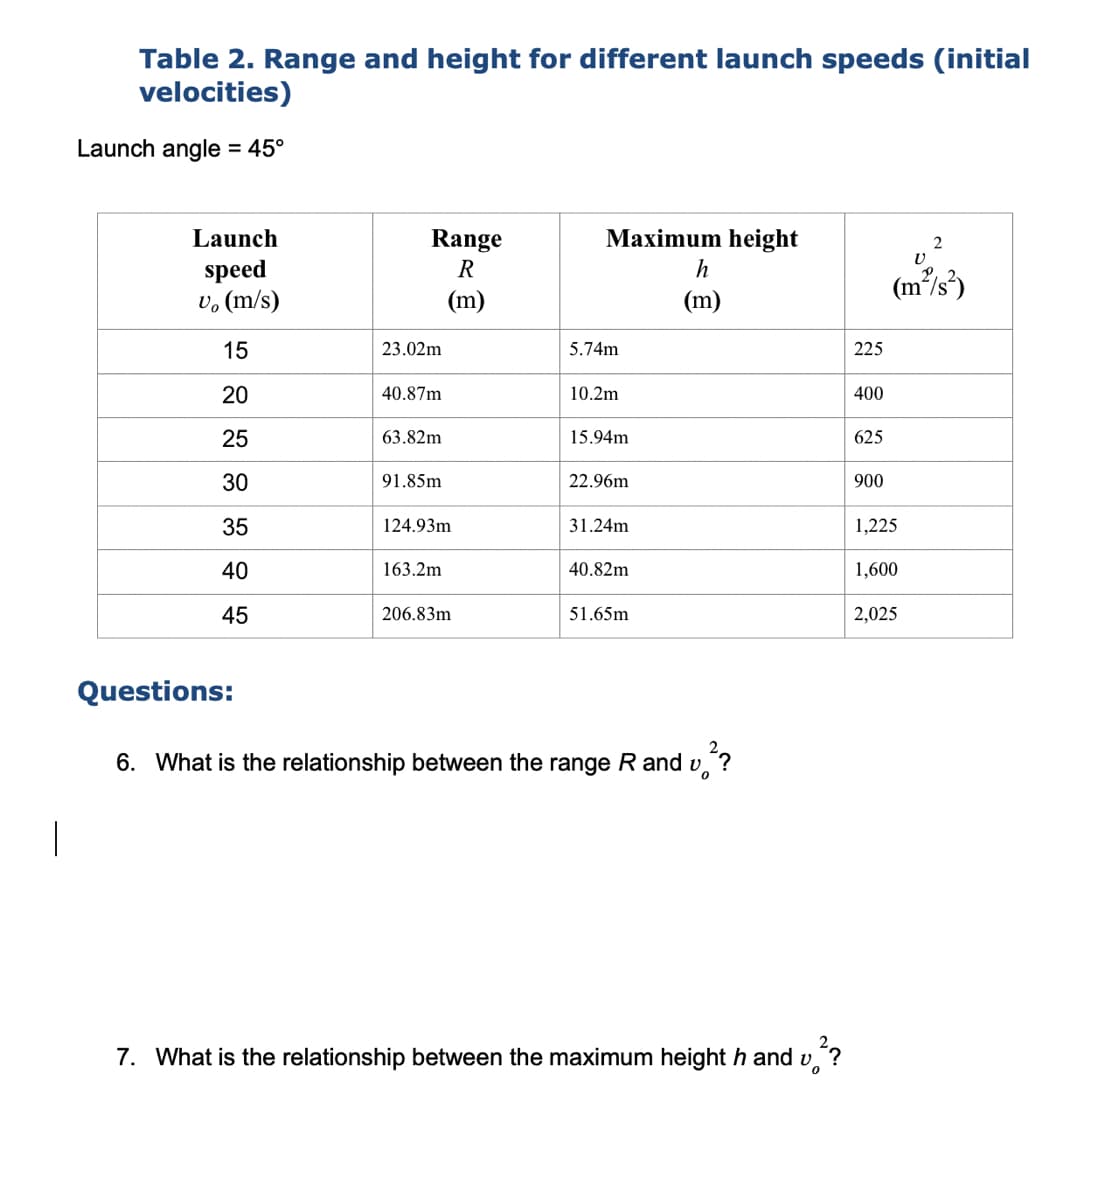 Table 2. Range and height for different launch speeds (initial
velocities)
Launch angle = 45°
%3D
Launch
Range
Maximum height
2
speed
vo (m/s)
R
h
(m/s³)
(m)
(m)
15
23.02m
5.74m
225
20
40.87m
10.2m
400
25
63.82m
15.94m
625
30
91.85m
22.96m
900
35
124.93m
31.24m
1,225
40
163.2m
40.82m
1,600
45
206.83m
51.65m
2,025
Questions:
6. What is the relationship between the range R and v,?
7. What is the relationship between the maximum height h and v?
